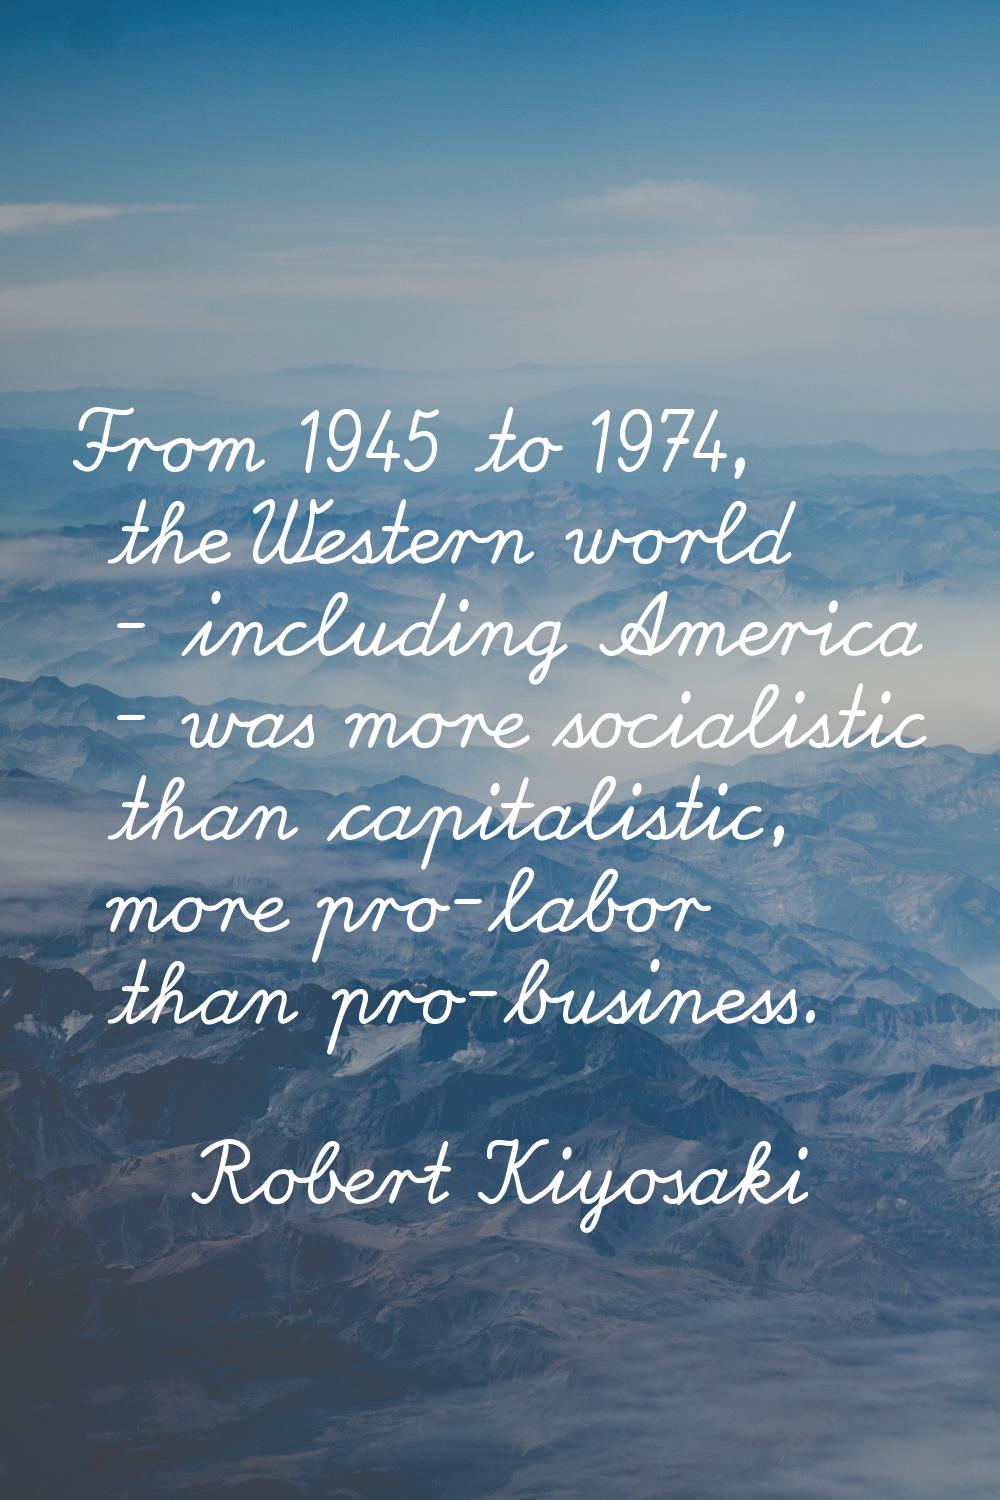 From 1945 to 1974, the Western world - including America - was more socialistic than capitalistic, 